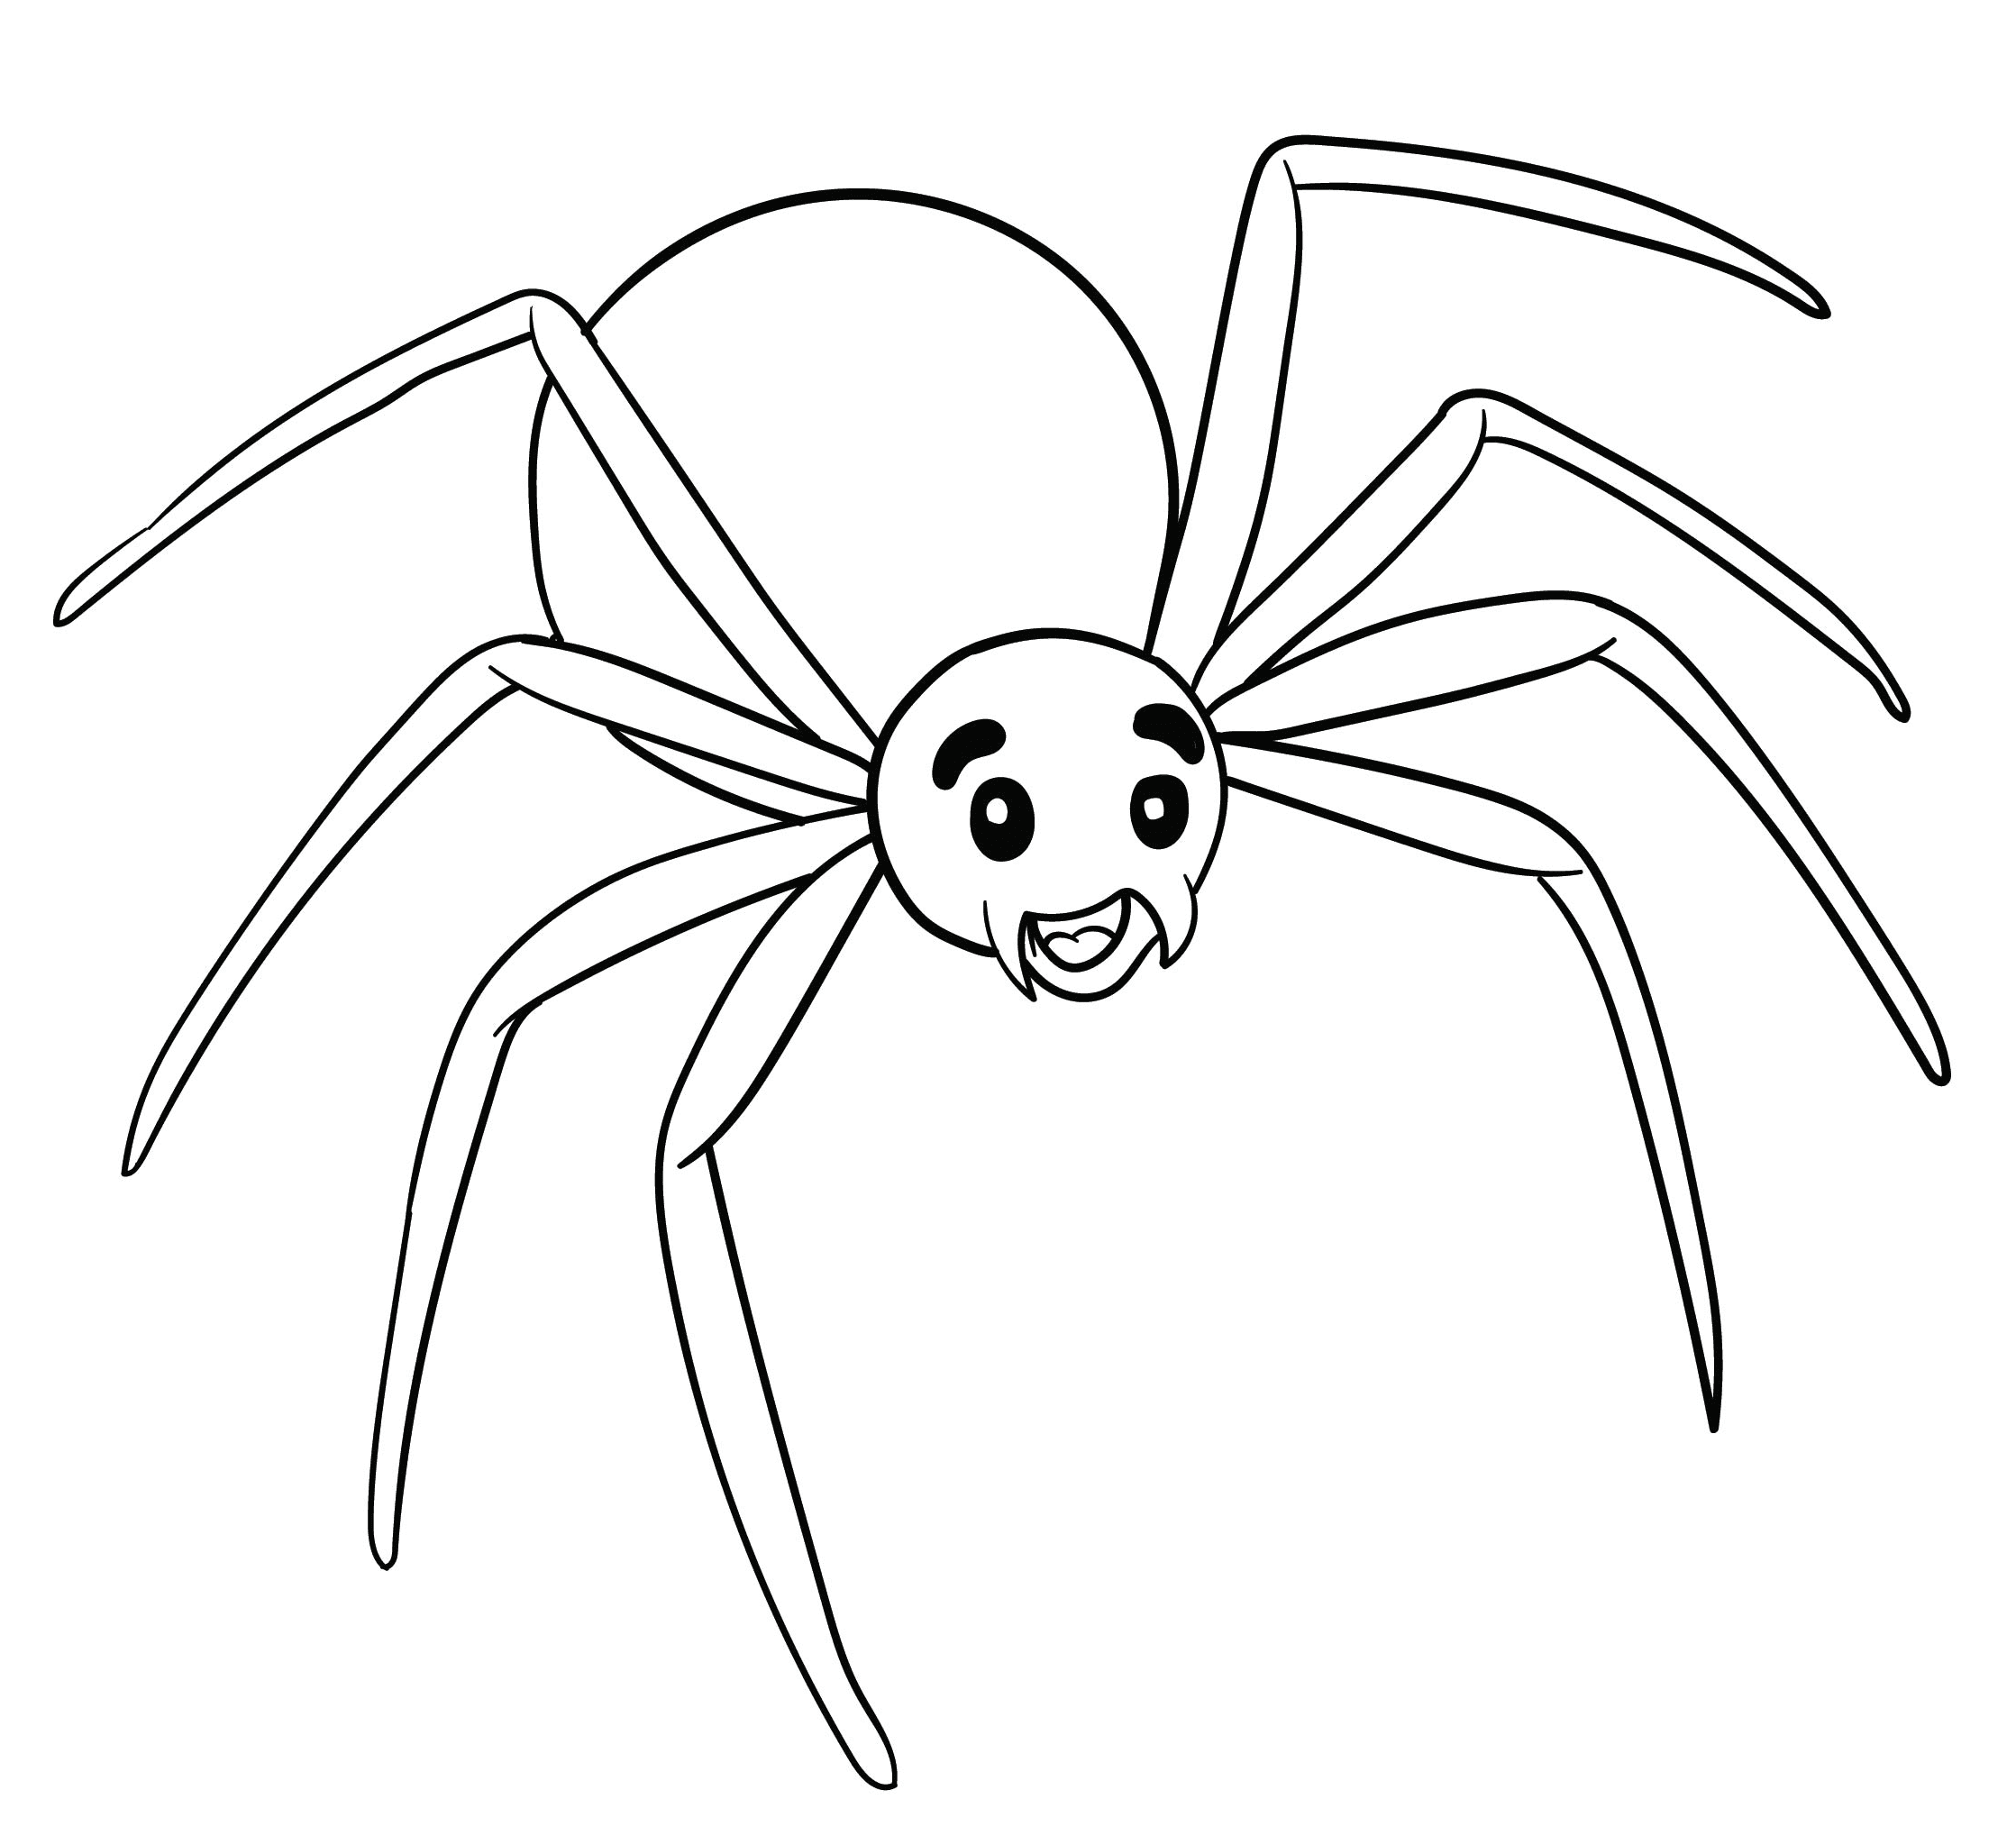 Free Printable Spider Coloring Page